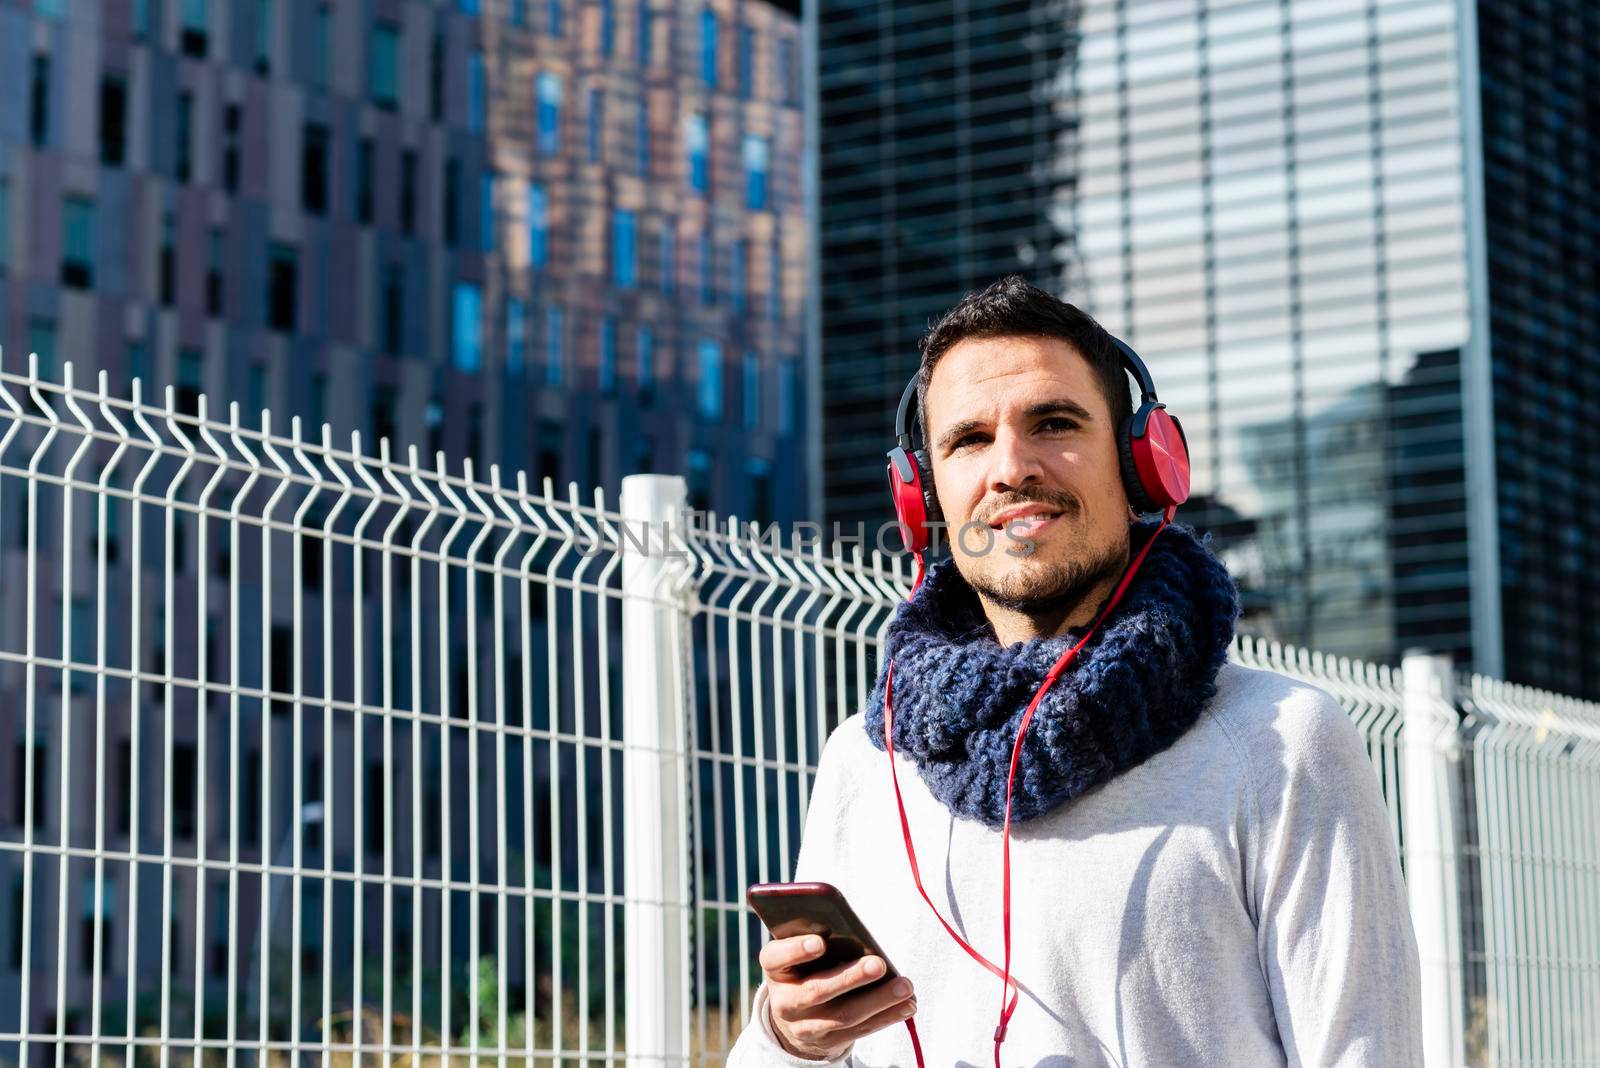 Young man listening music by headphones while holding a mobile phone outdoor by raferto1973